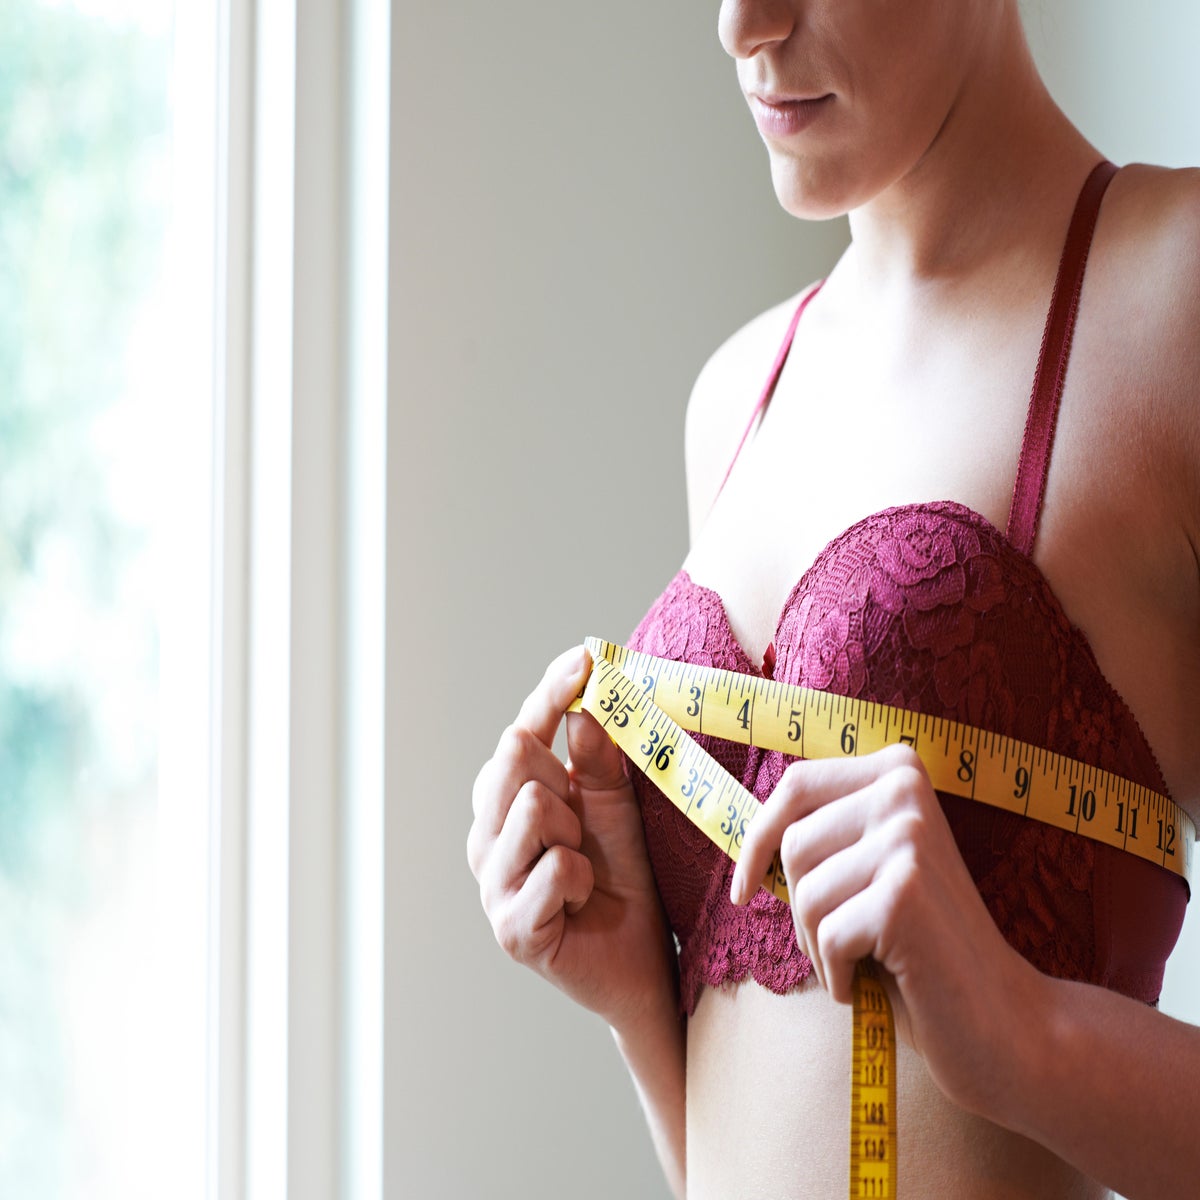 Most women wearing the wrong bra size